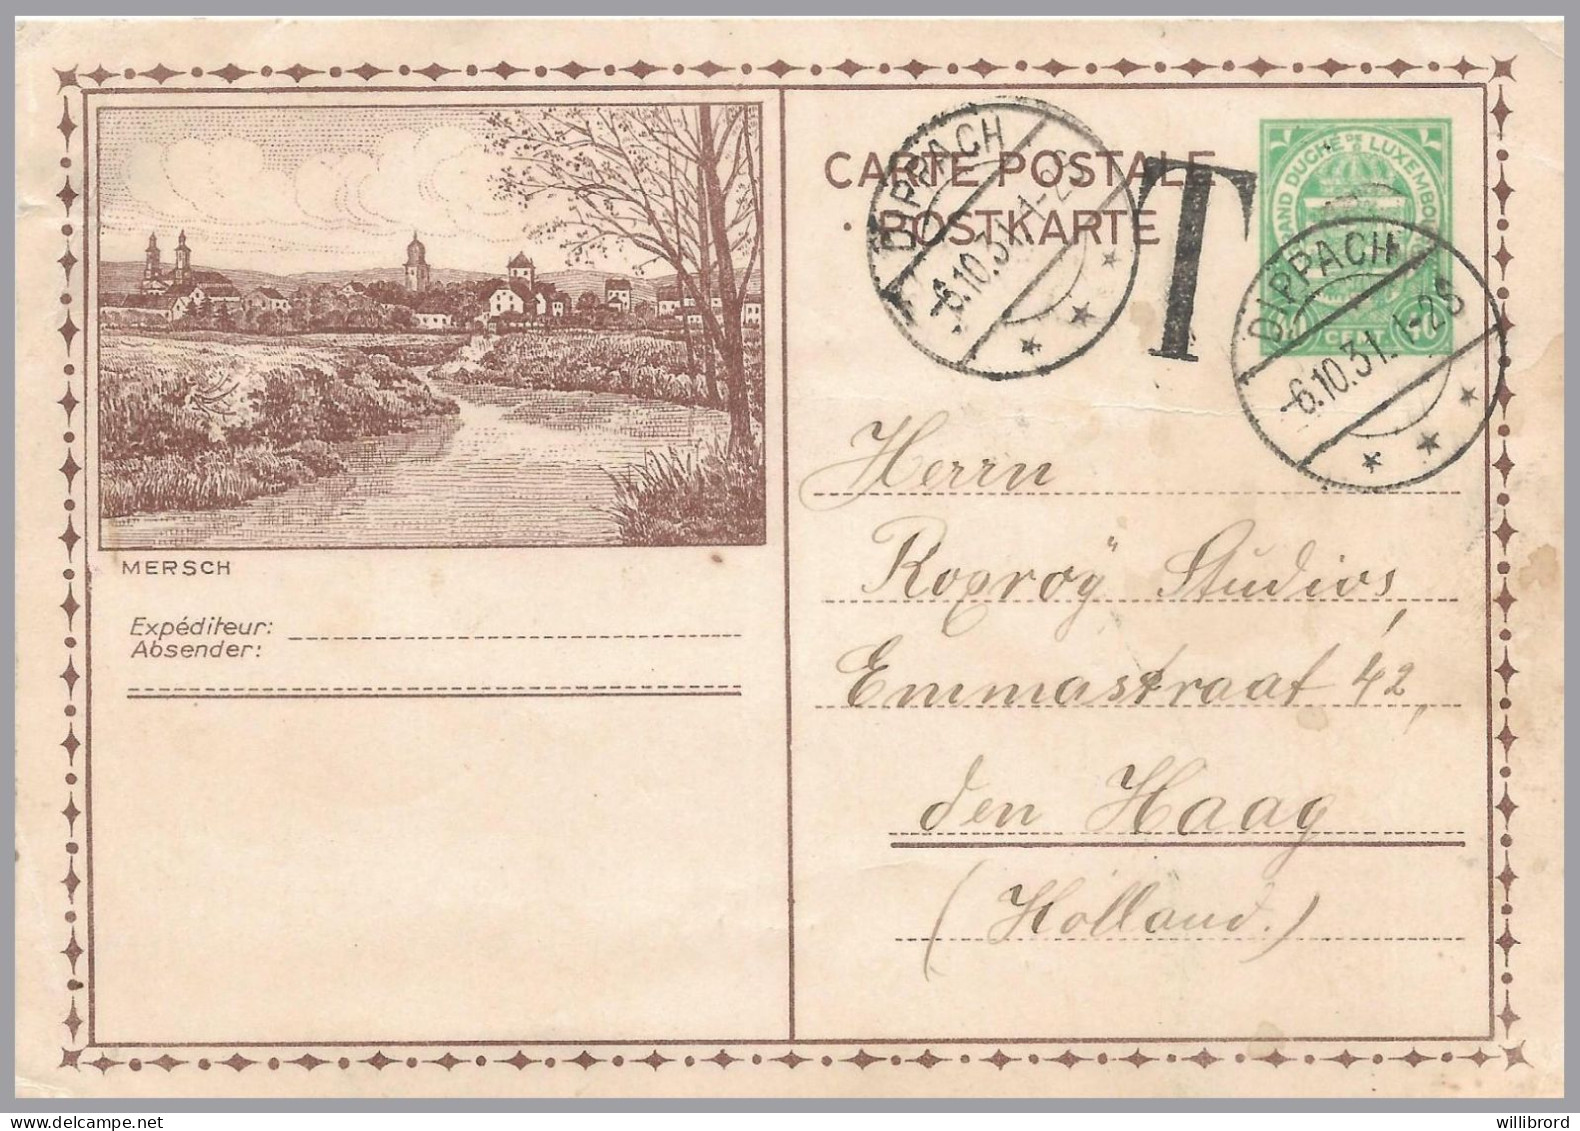 LUXEMBOURG - DIPPACH T-34 1931 - MERSCH View Arms Postal Stationery - Postage Due To Netherlands - Enteros Postales